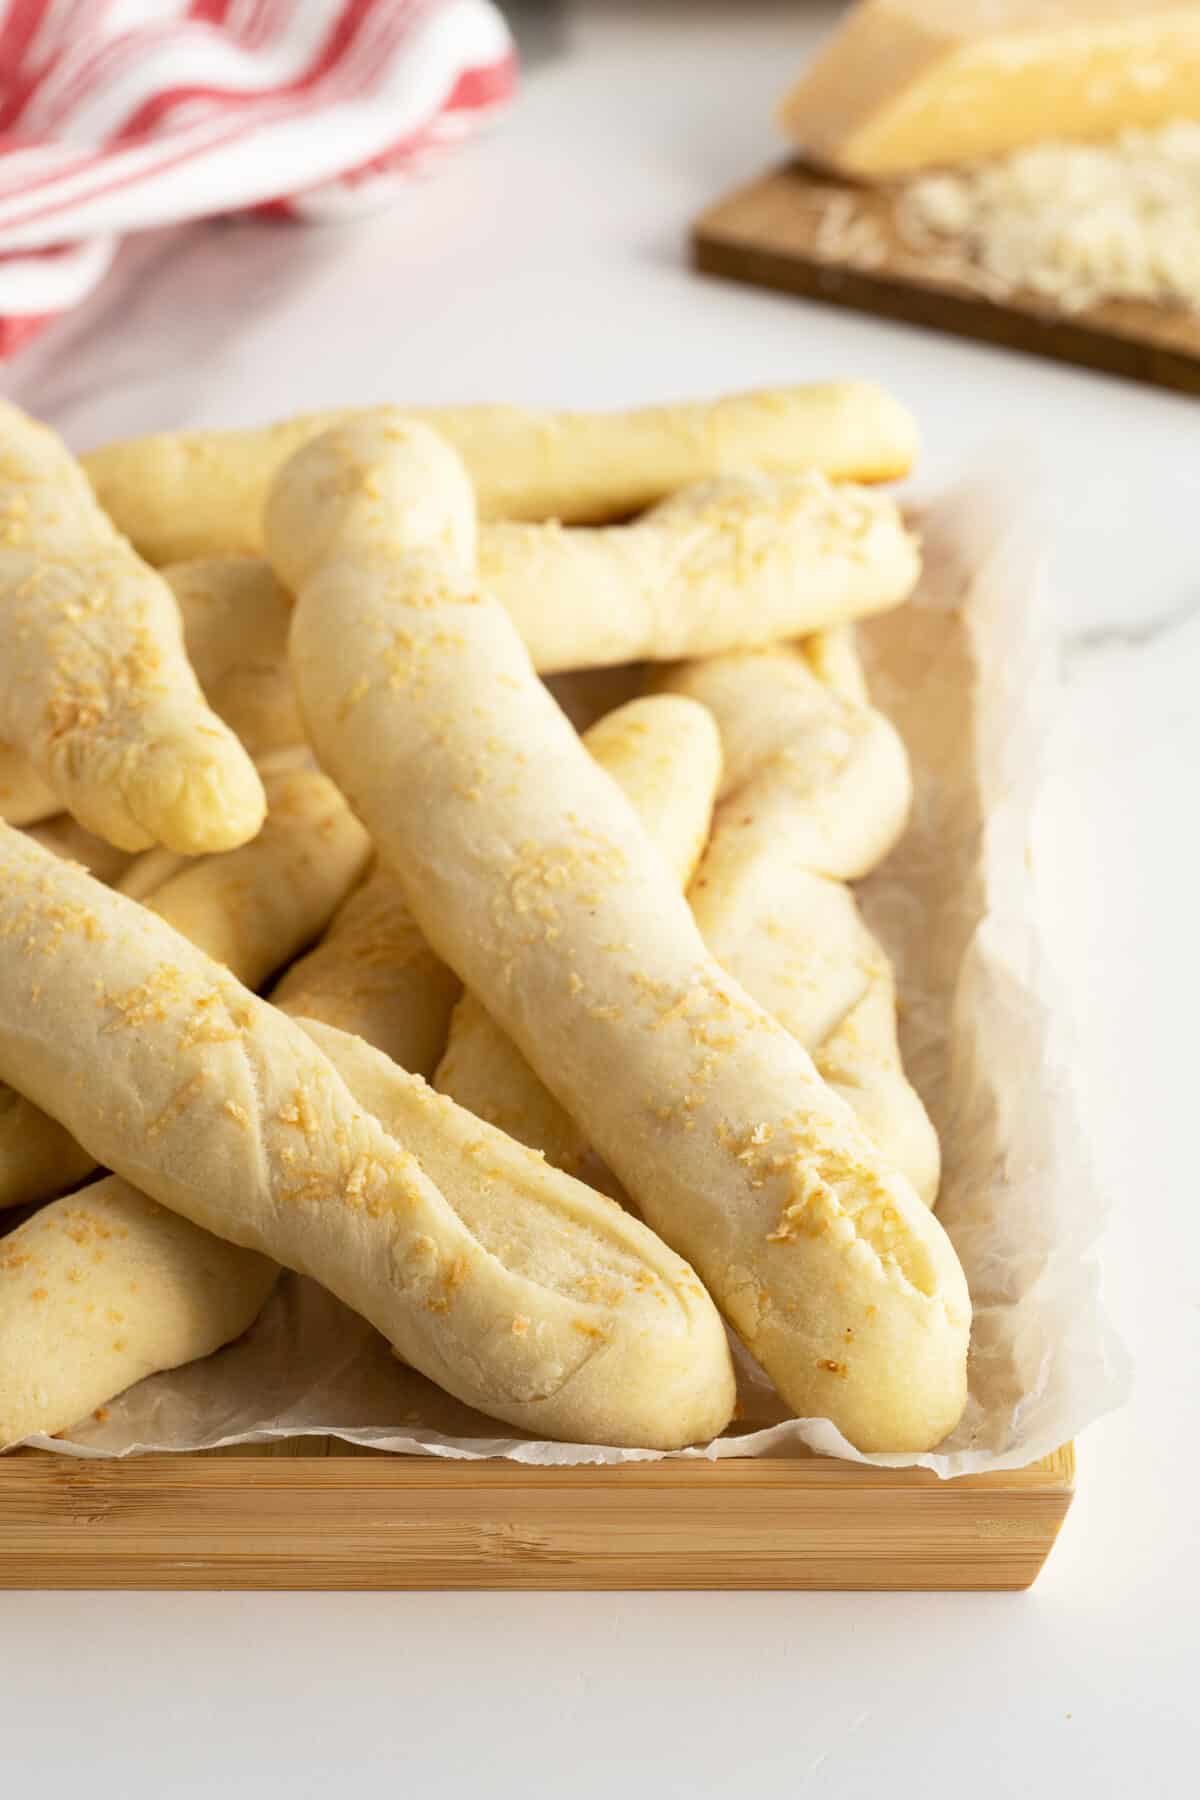 homemade breadsticks on parchment paper on a wooden cutting board
